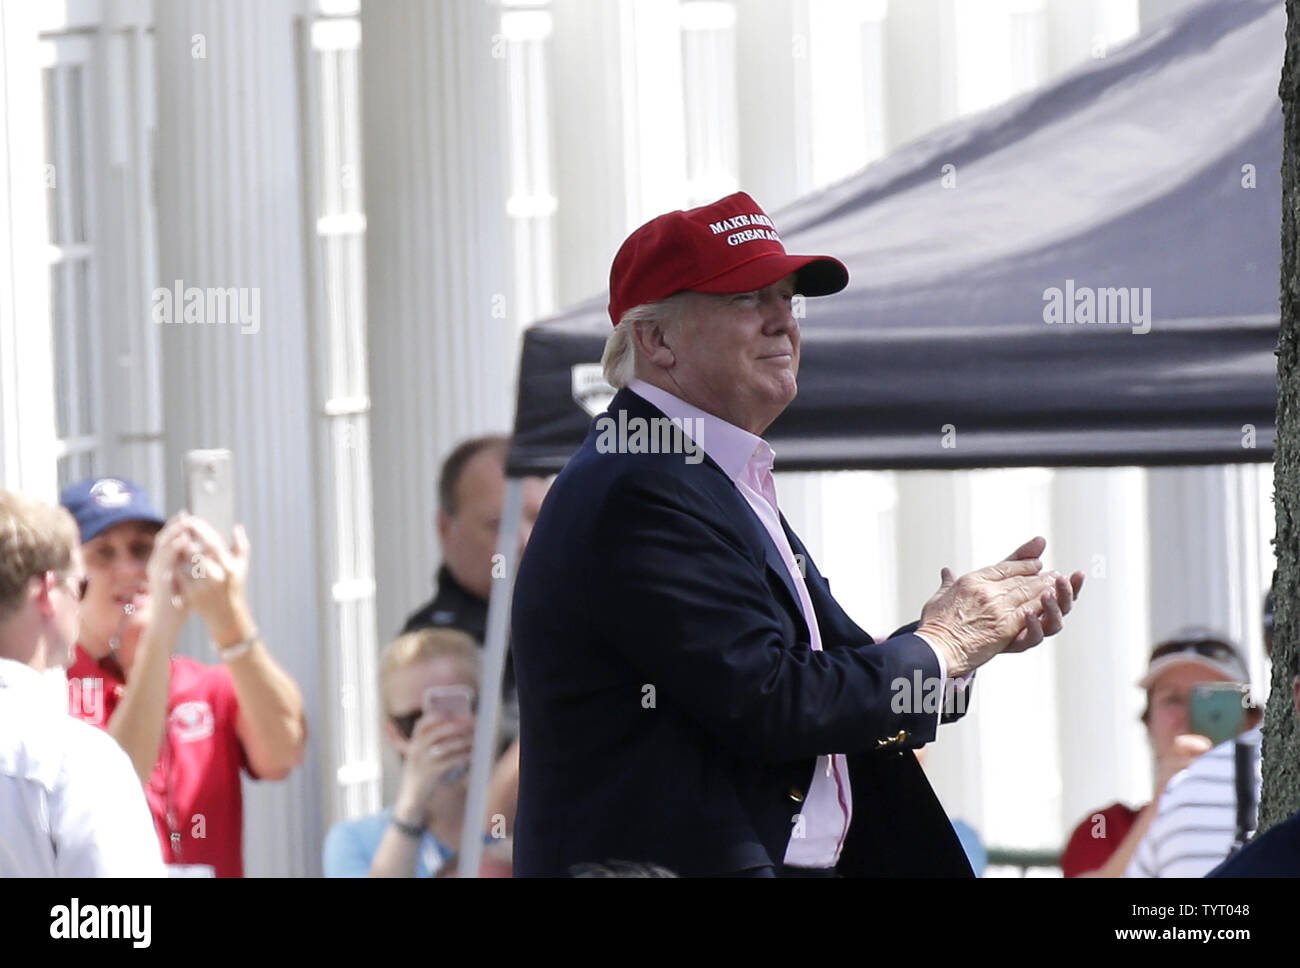 United States President Donald Trump arrives at Trump National Golf Club for the final round of the LPGA U.S. Women's Open Championship  in Bedminster, NJ on July 14, 2017.     Photo by John Angelillo/UPI Stock Photo